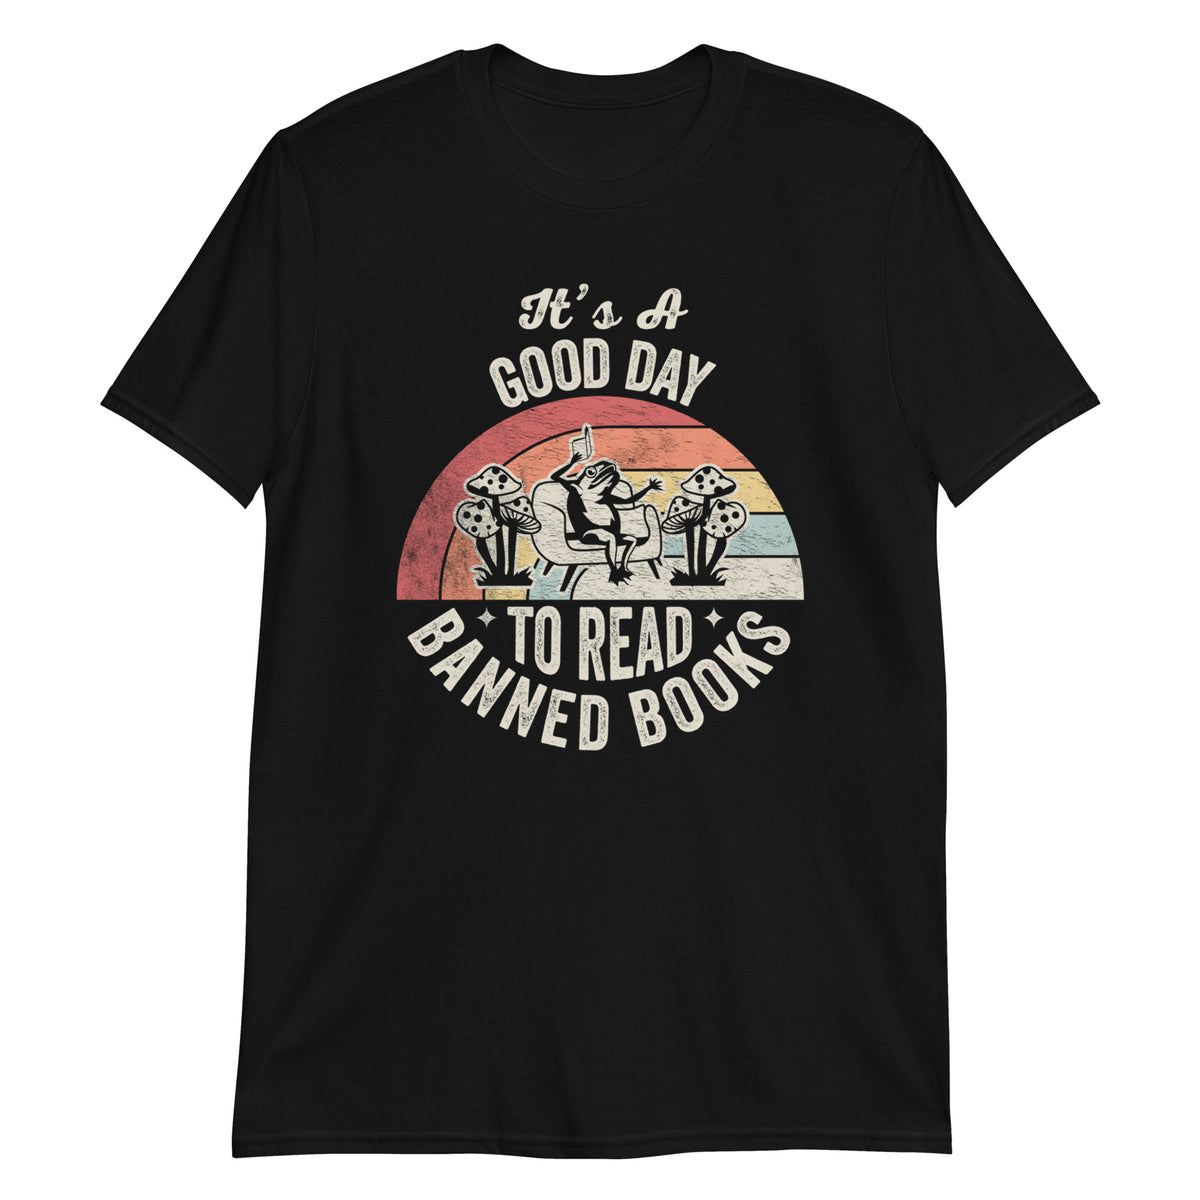 It's a Good Day to Read Banned Books T-Shirt